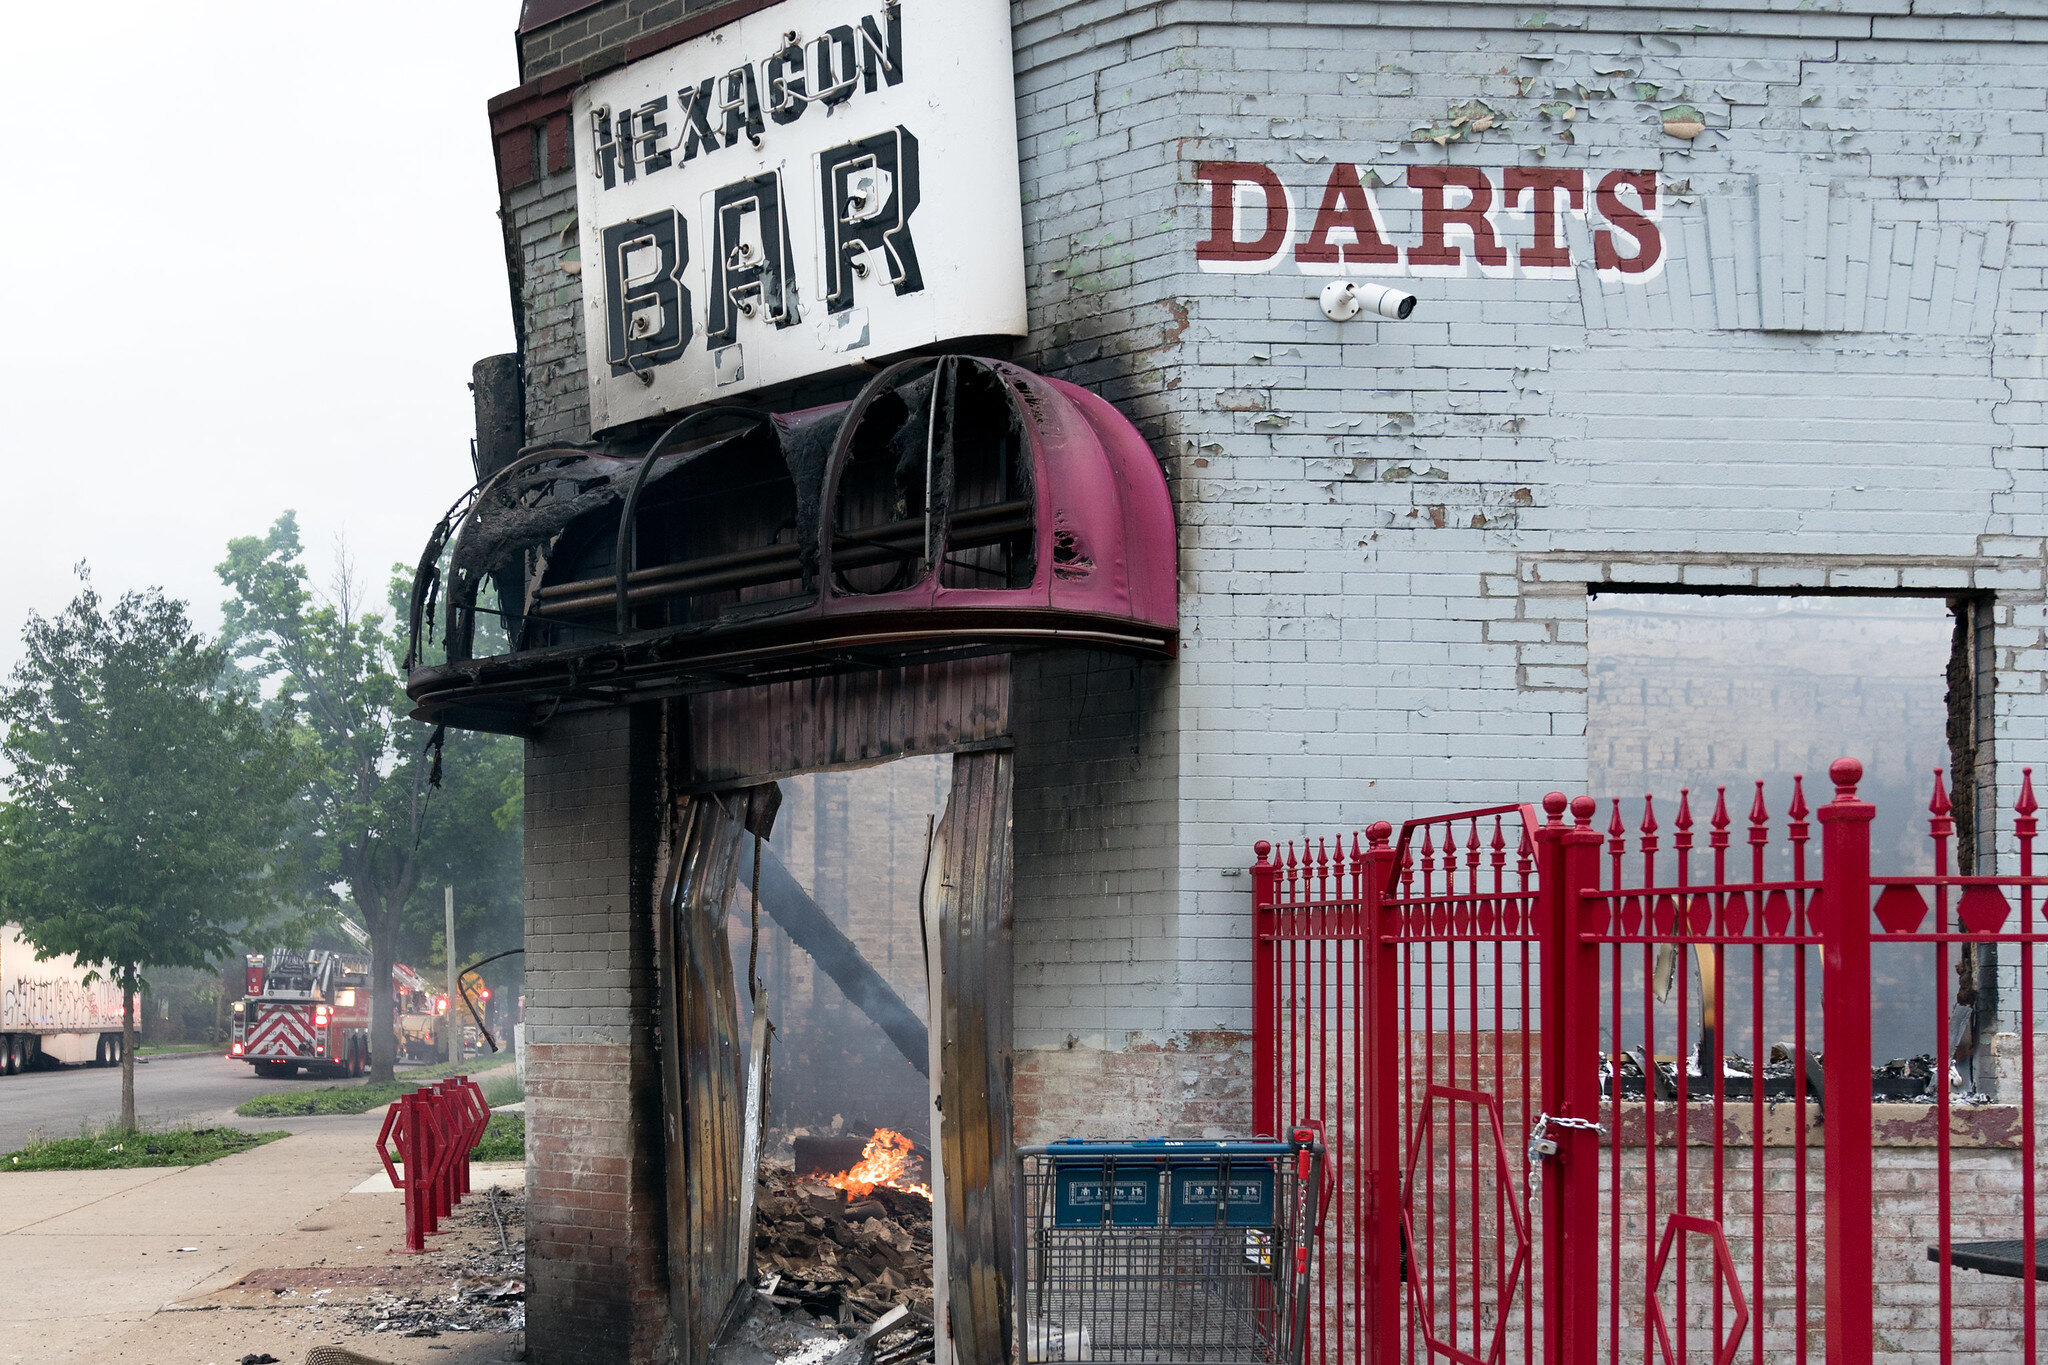  Hexagon Bar is destroyed by fire in Minneapolis, Minnesota. 